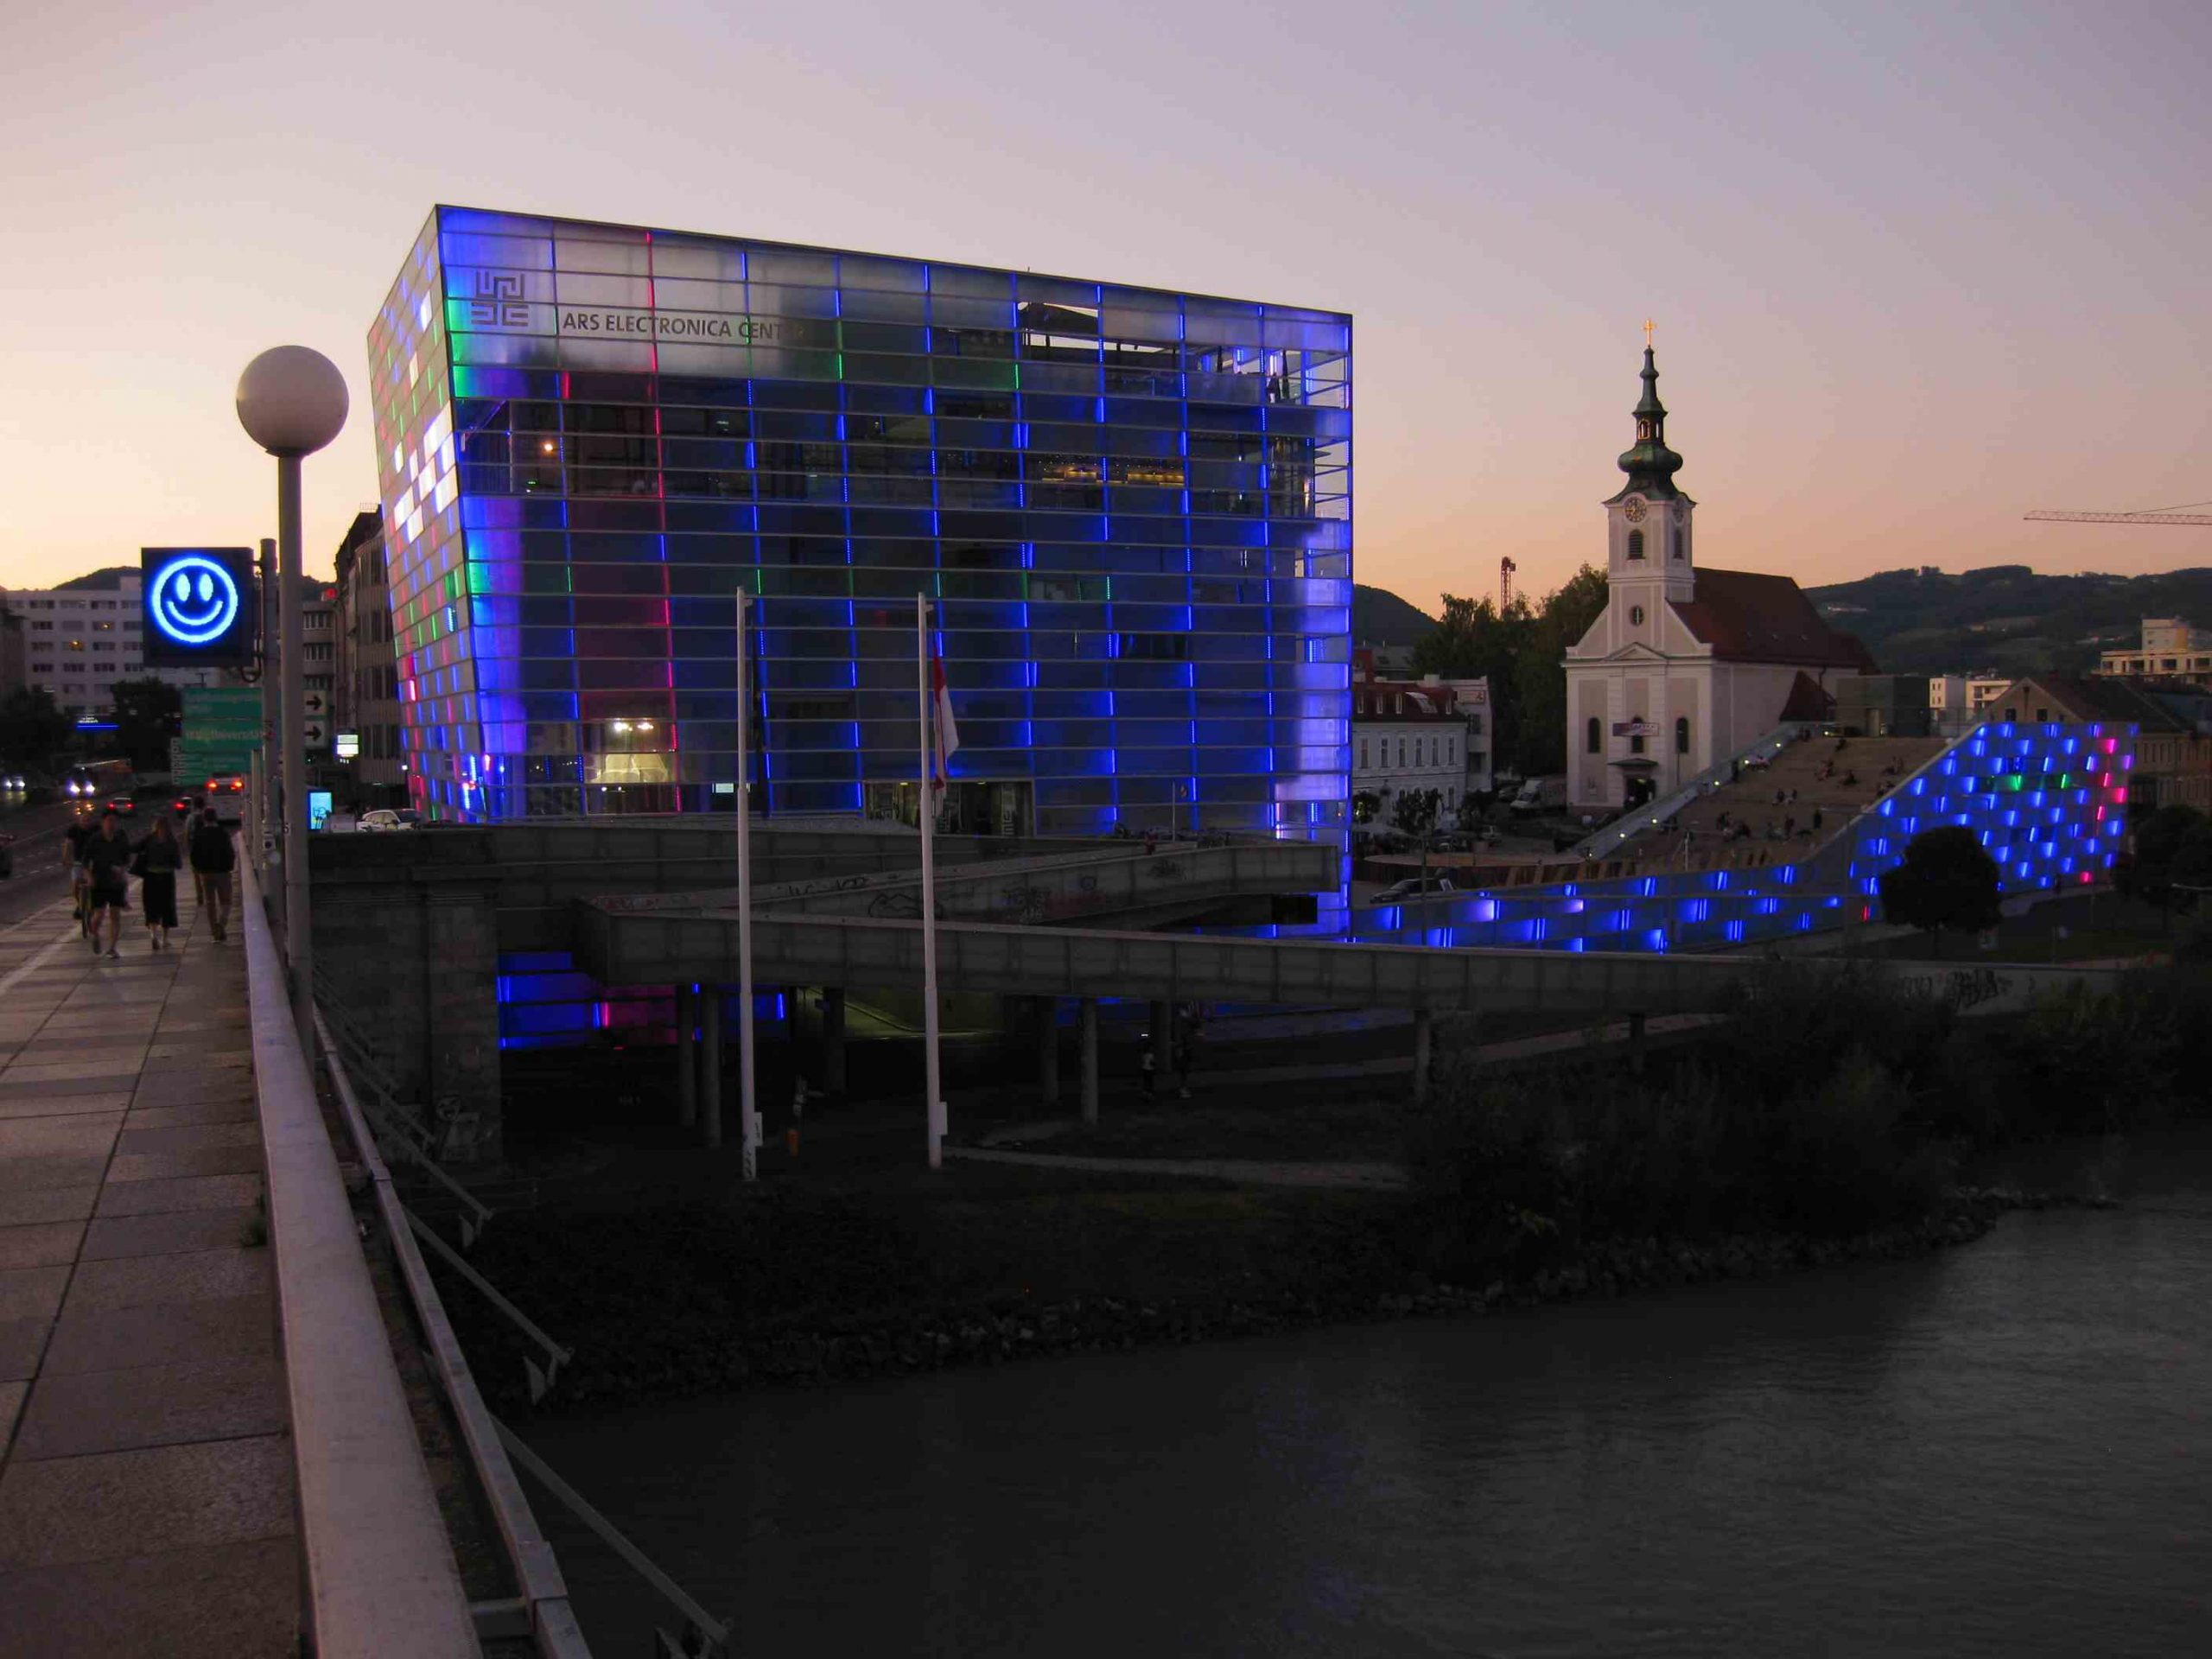 Ars Electronica Center in Linz